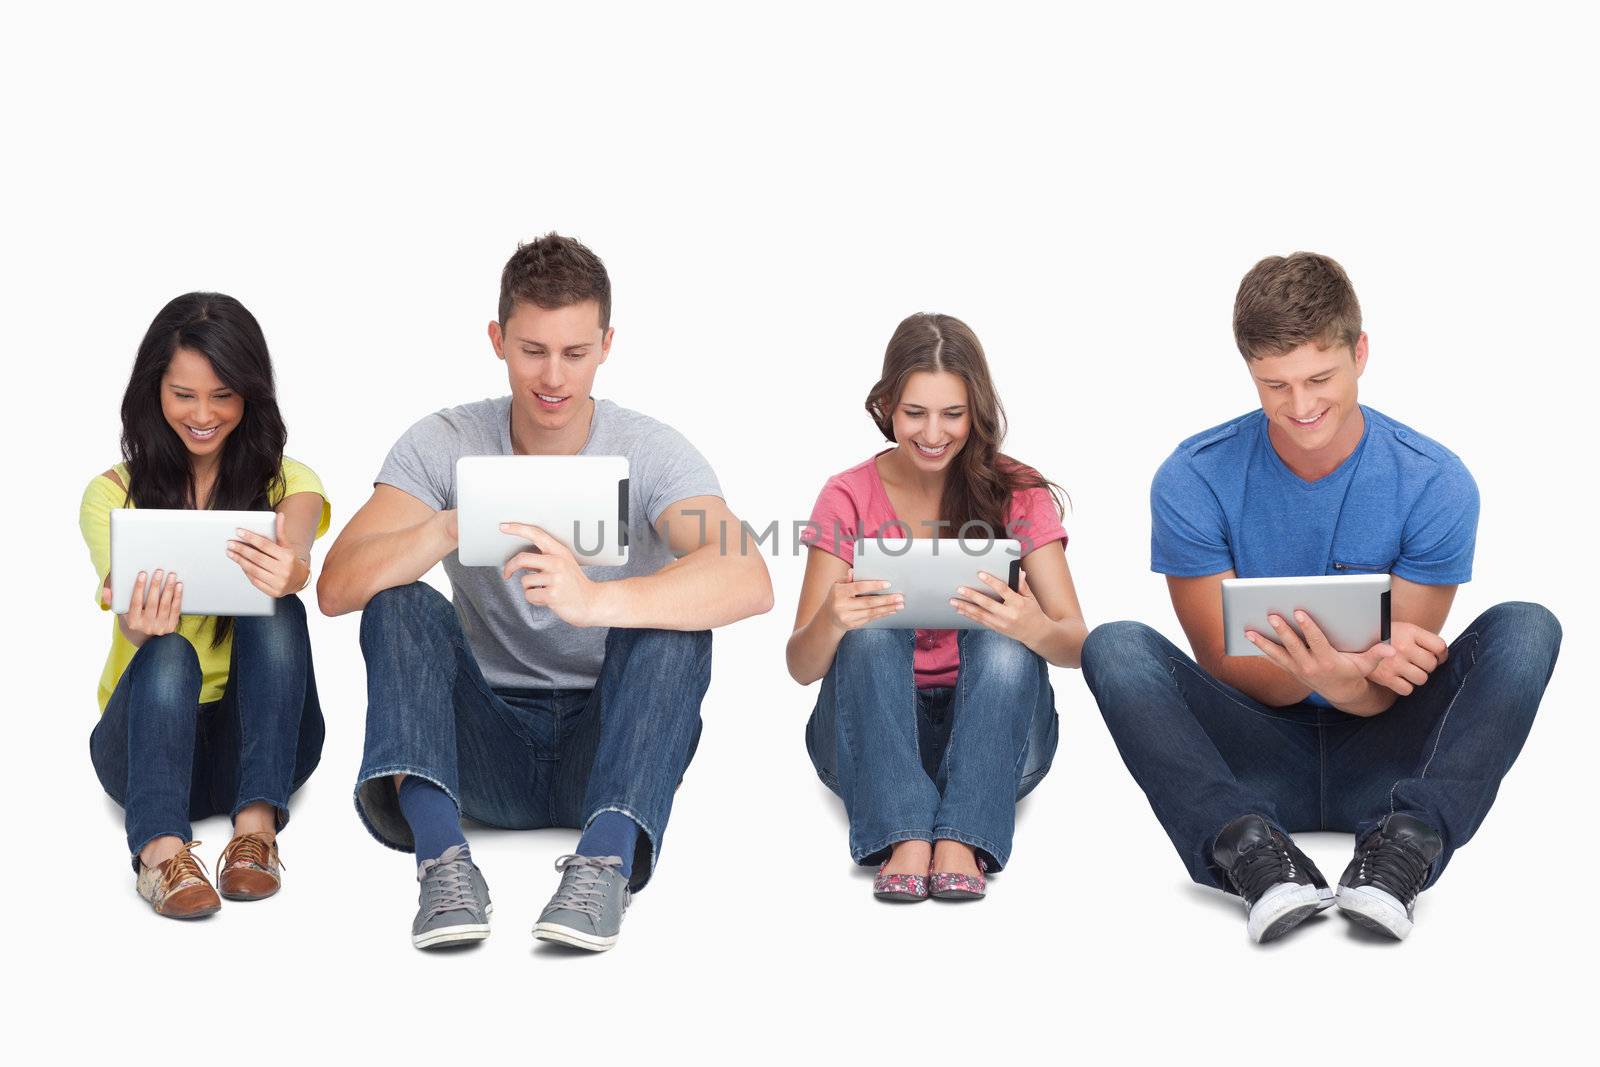 Four smiling friends sitting on the ground beside each other using tablet pc's